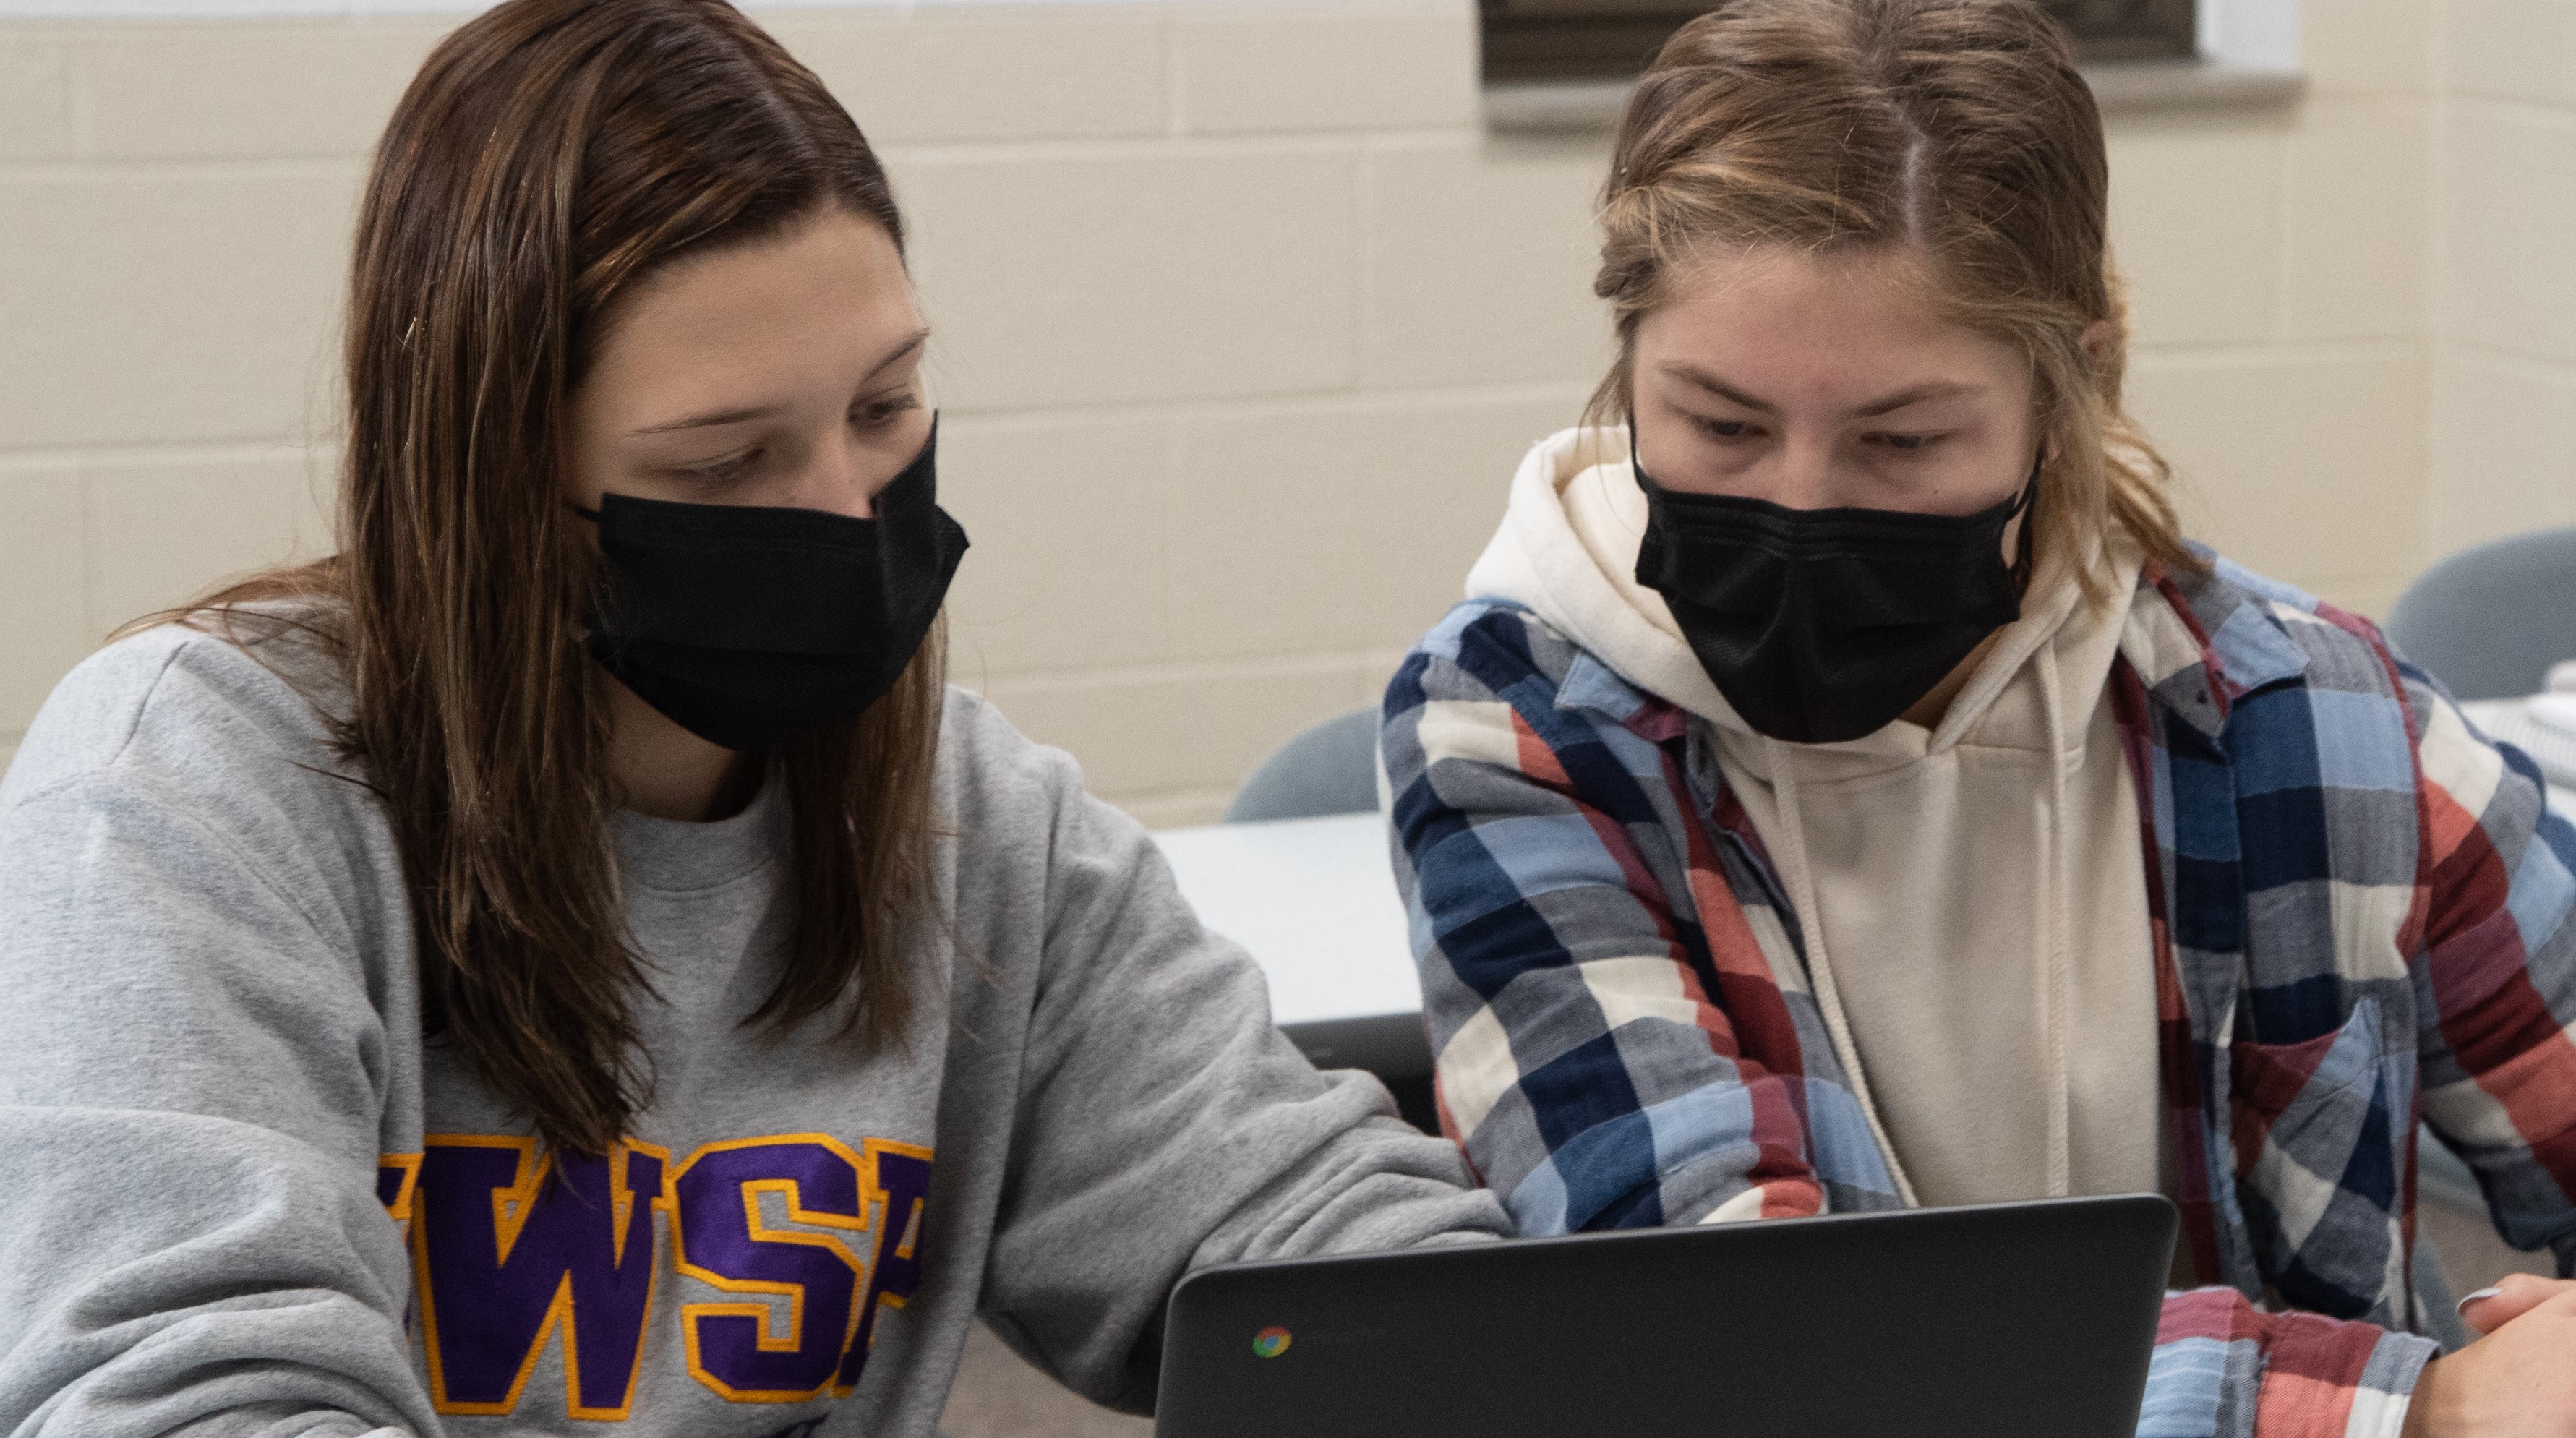 Two UWSP students working together in front of a Chromebook